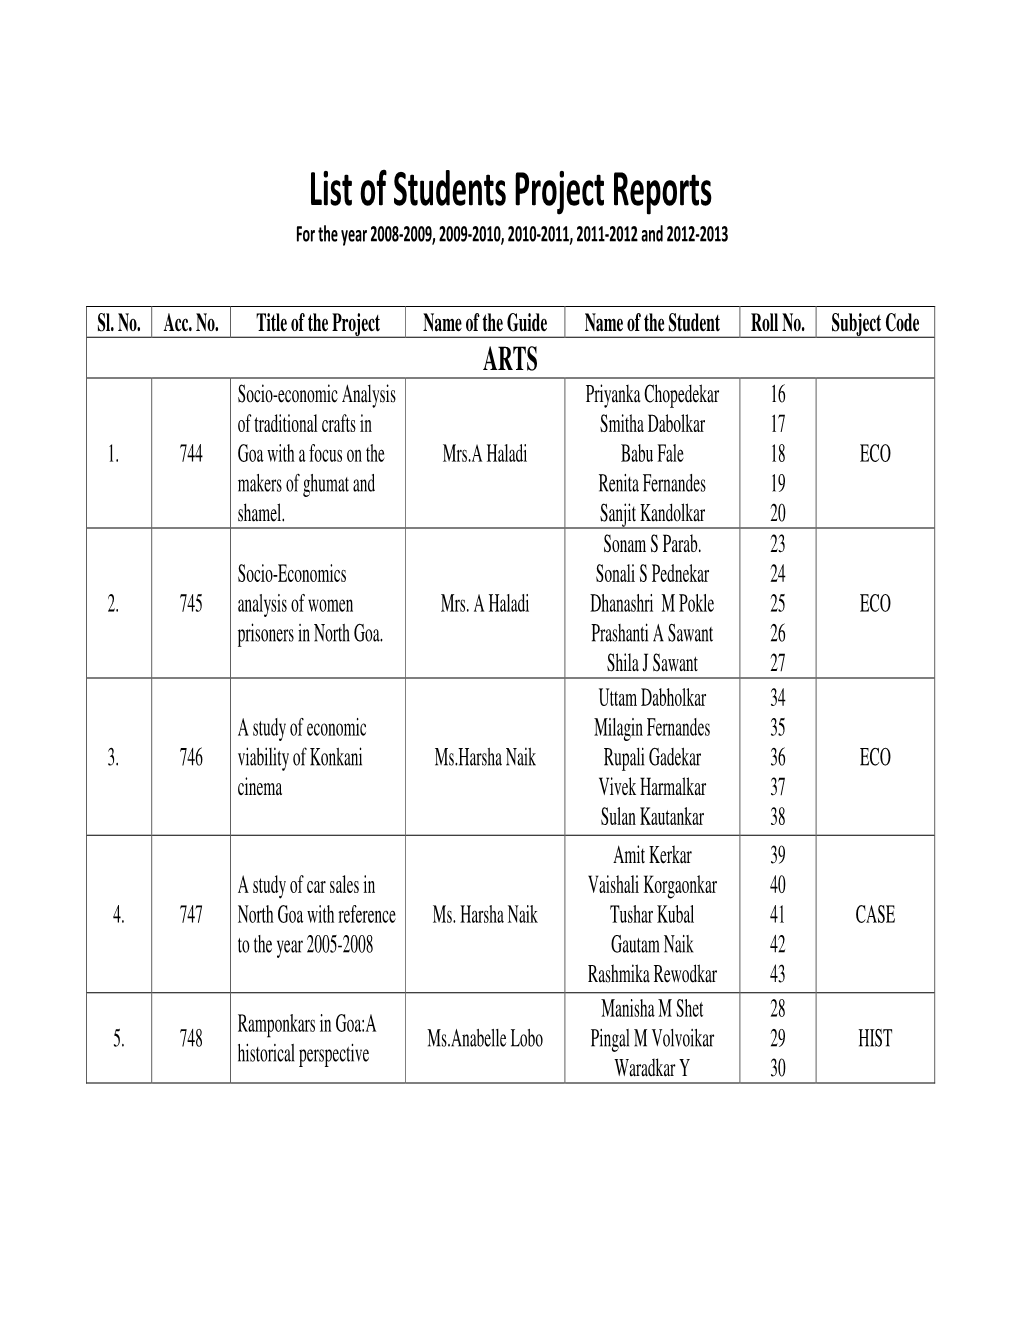 List of Students Project Reports for the Year 2008-2009, 2009-2010, 2010-2011, 2011-2012 and 2012-2013